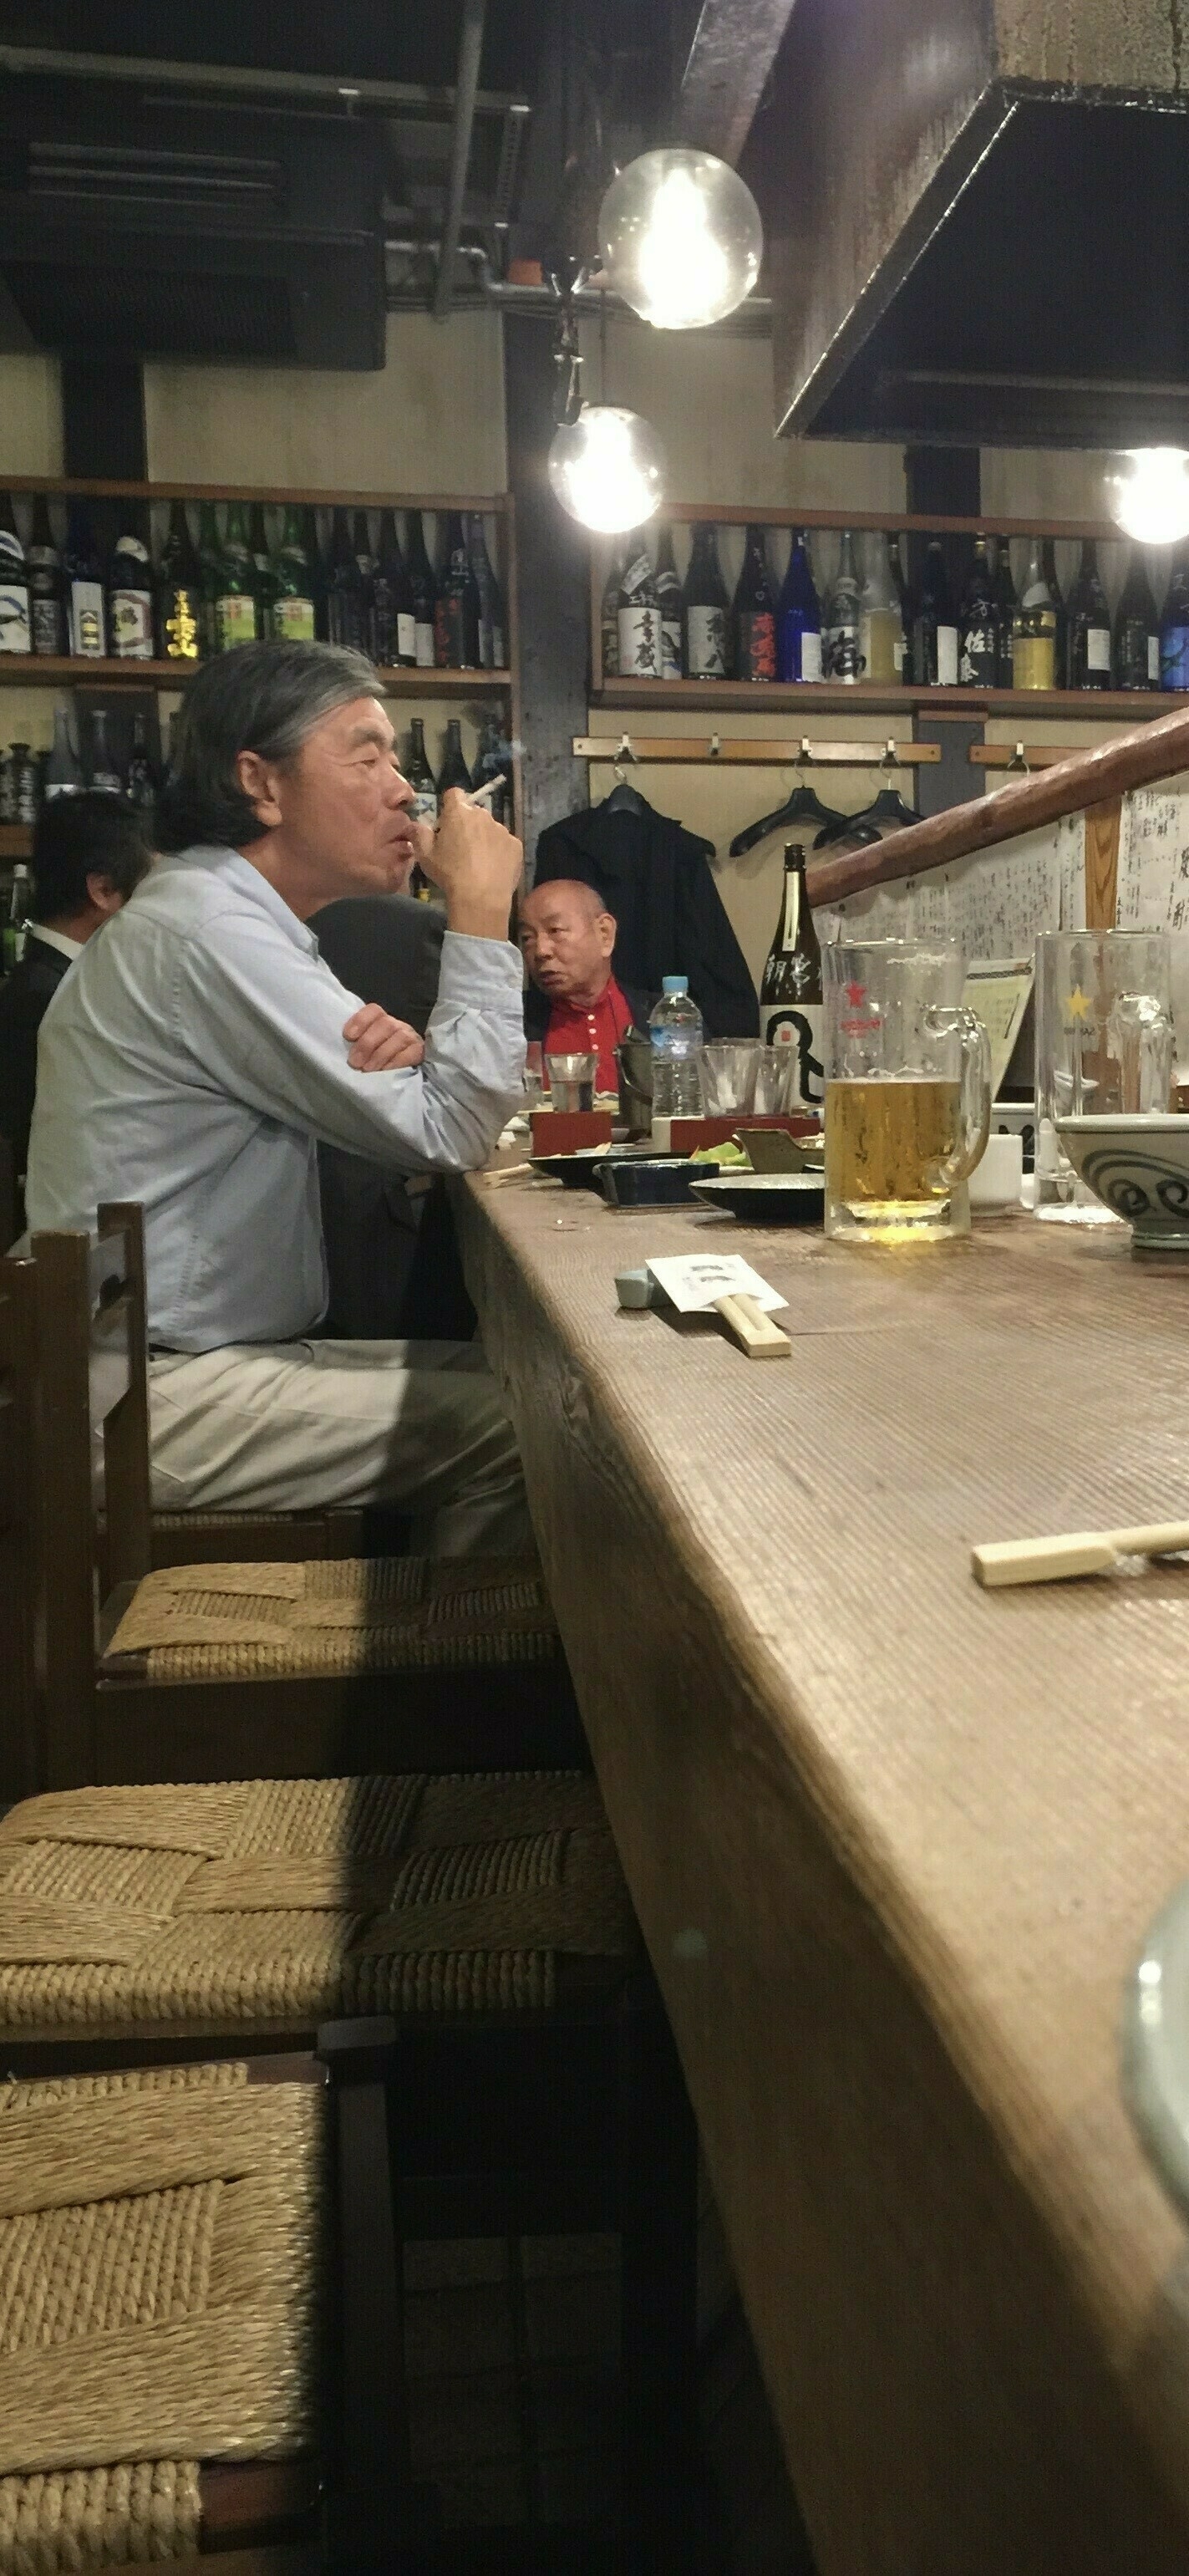 Japanese men sitting at a bar in Japan. One is smoking. A half drunk glass of beer sits nearby